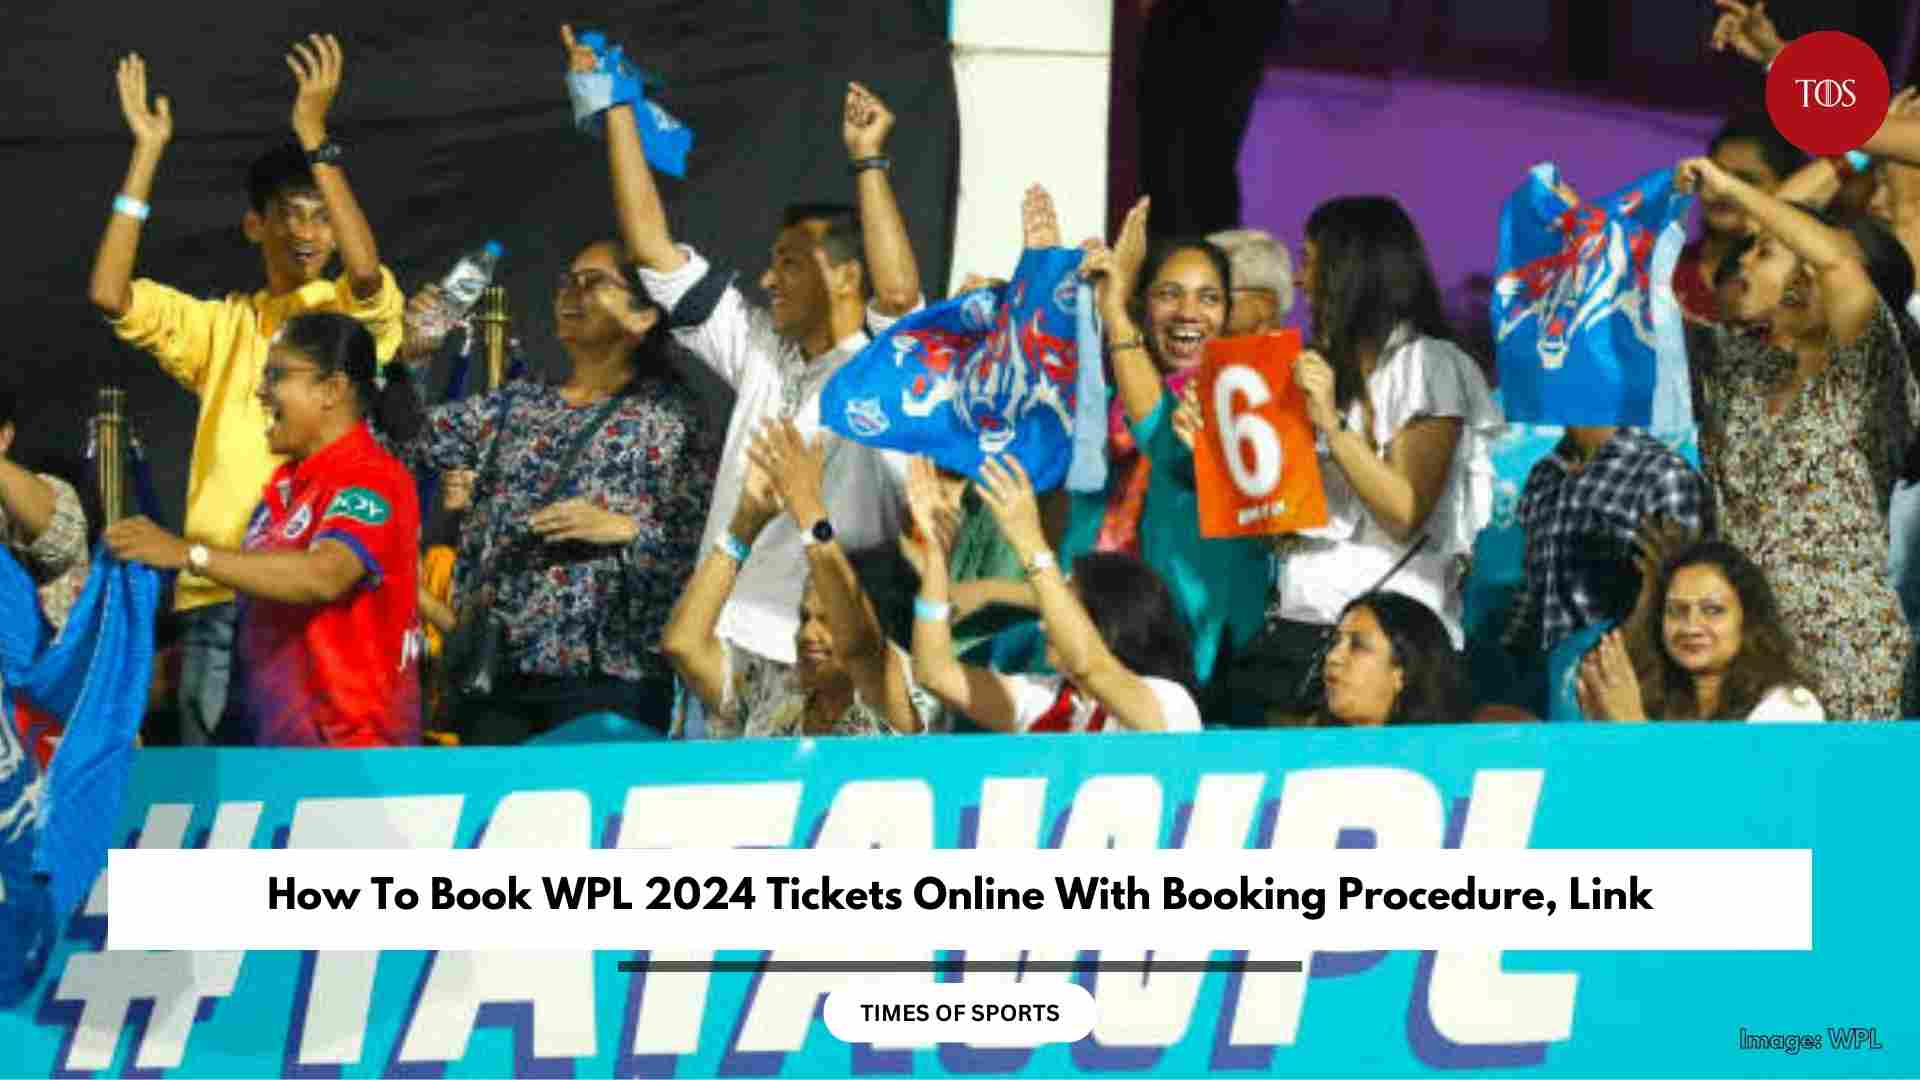 How To Book WPL 2024 Tickets Online With Booking Procedure, Link